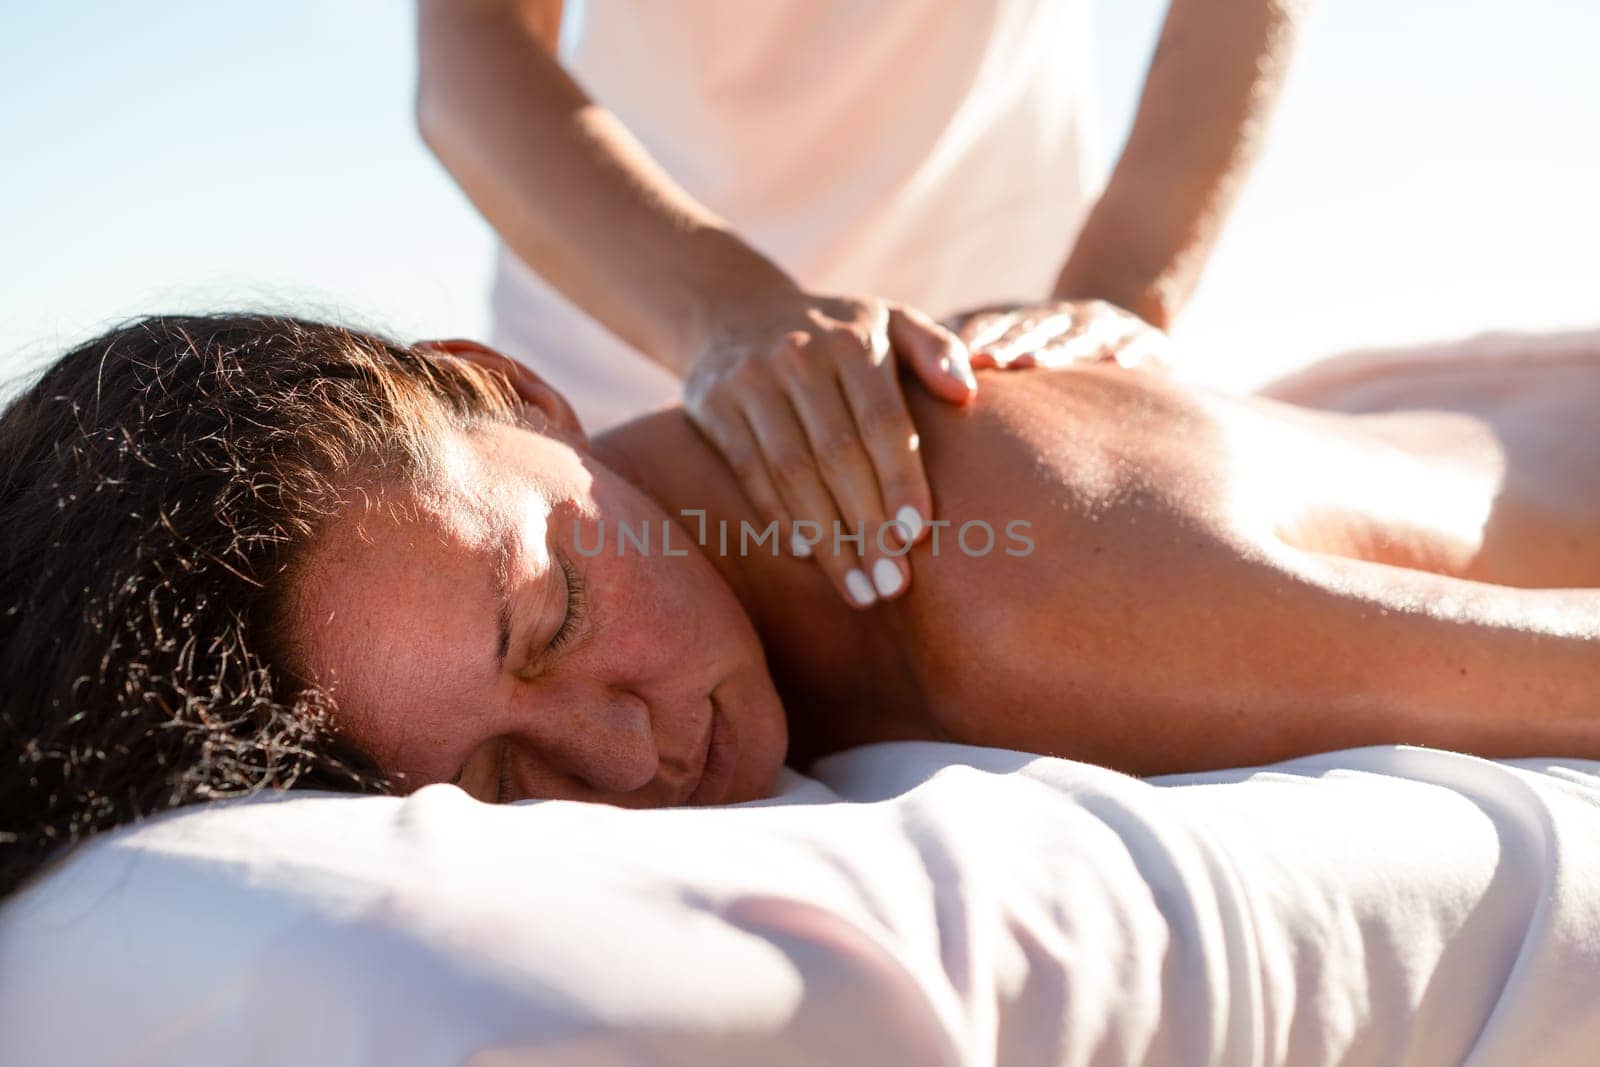 Crop anonymous masseur massaging the back of relaxed female tourist on special table. Brunette woman enjoying spa body treatment outdoors during summer vacation.